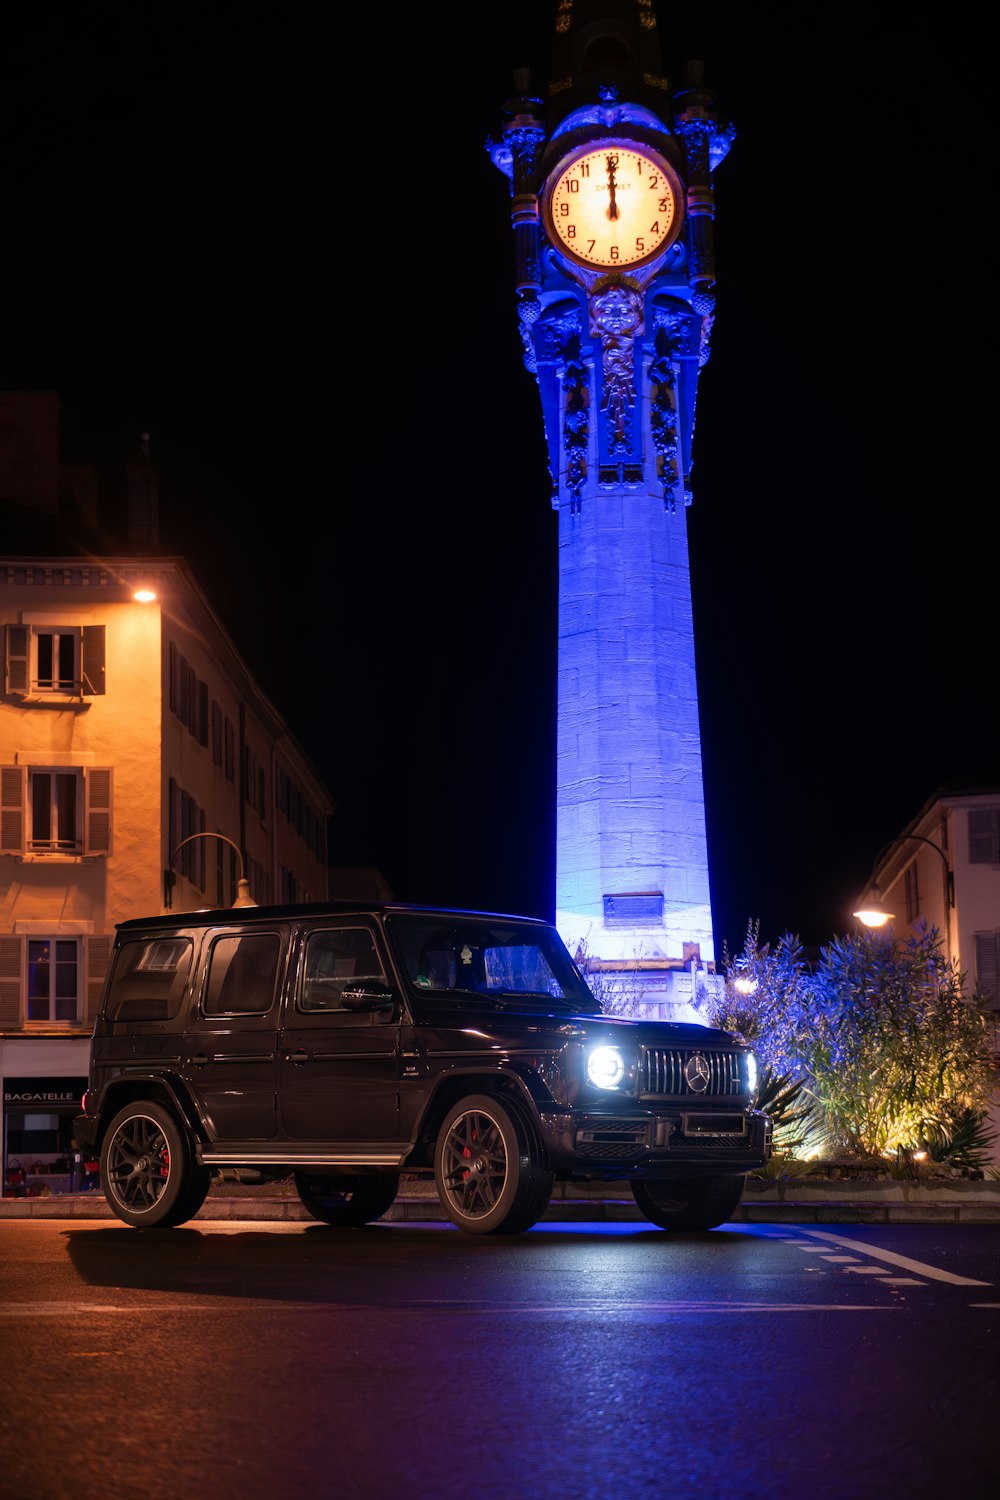 a car parked in front of a tall clock tower